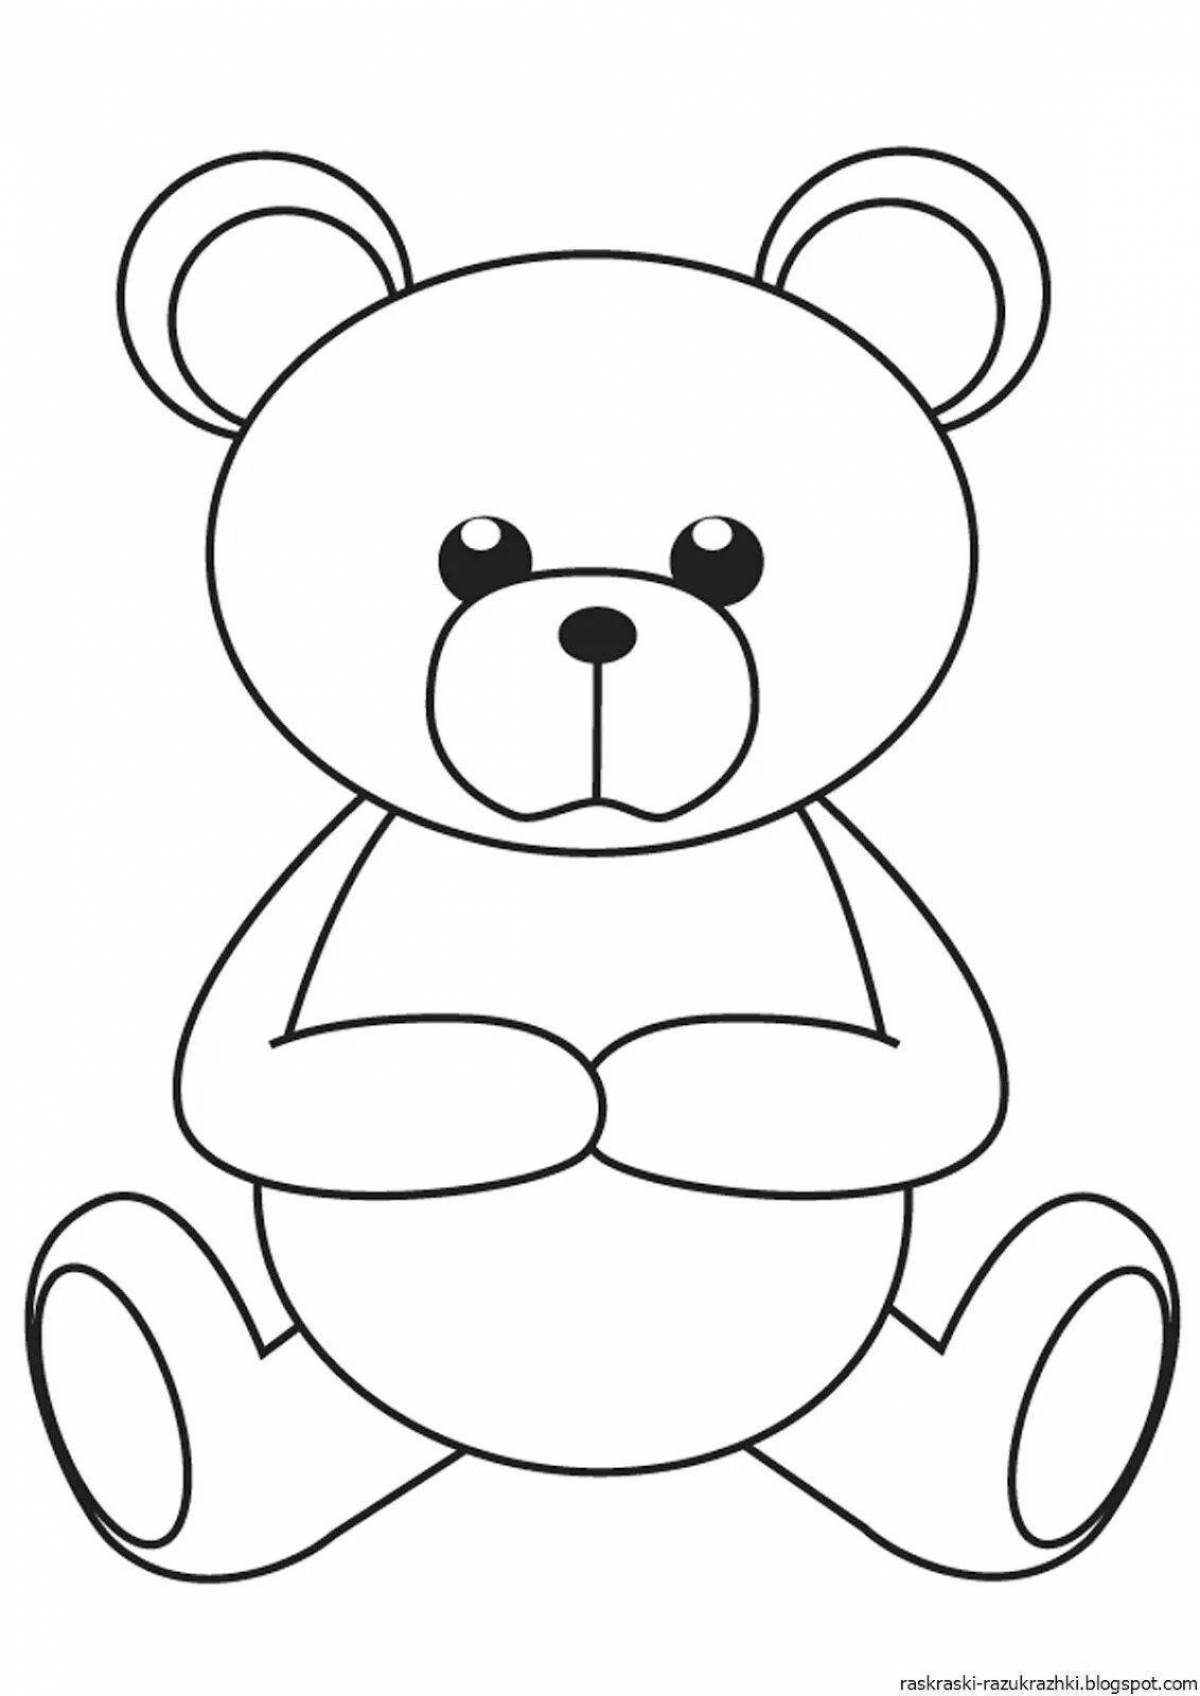 Calm bear coloring page